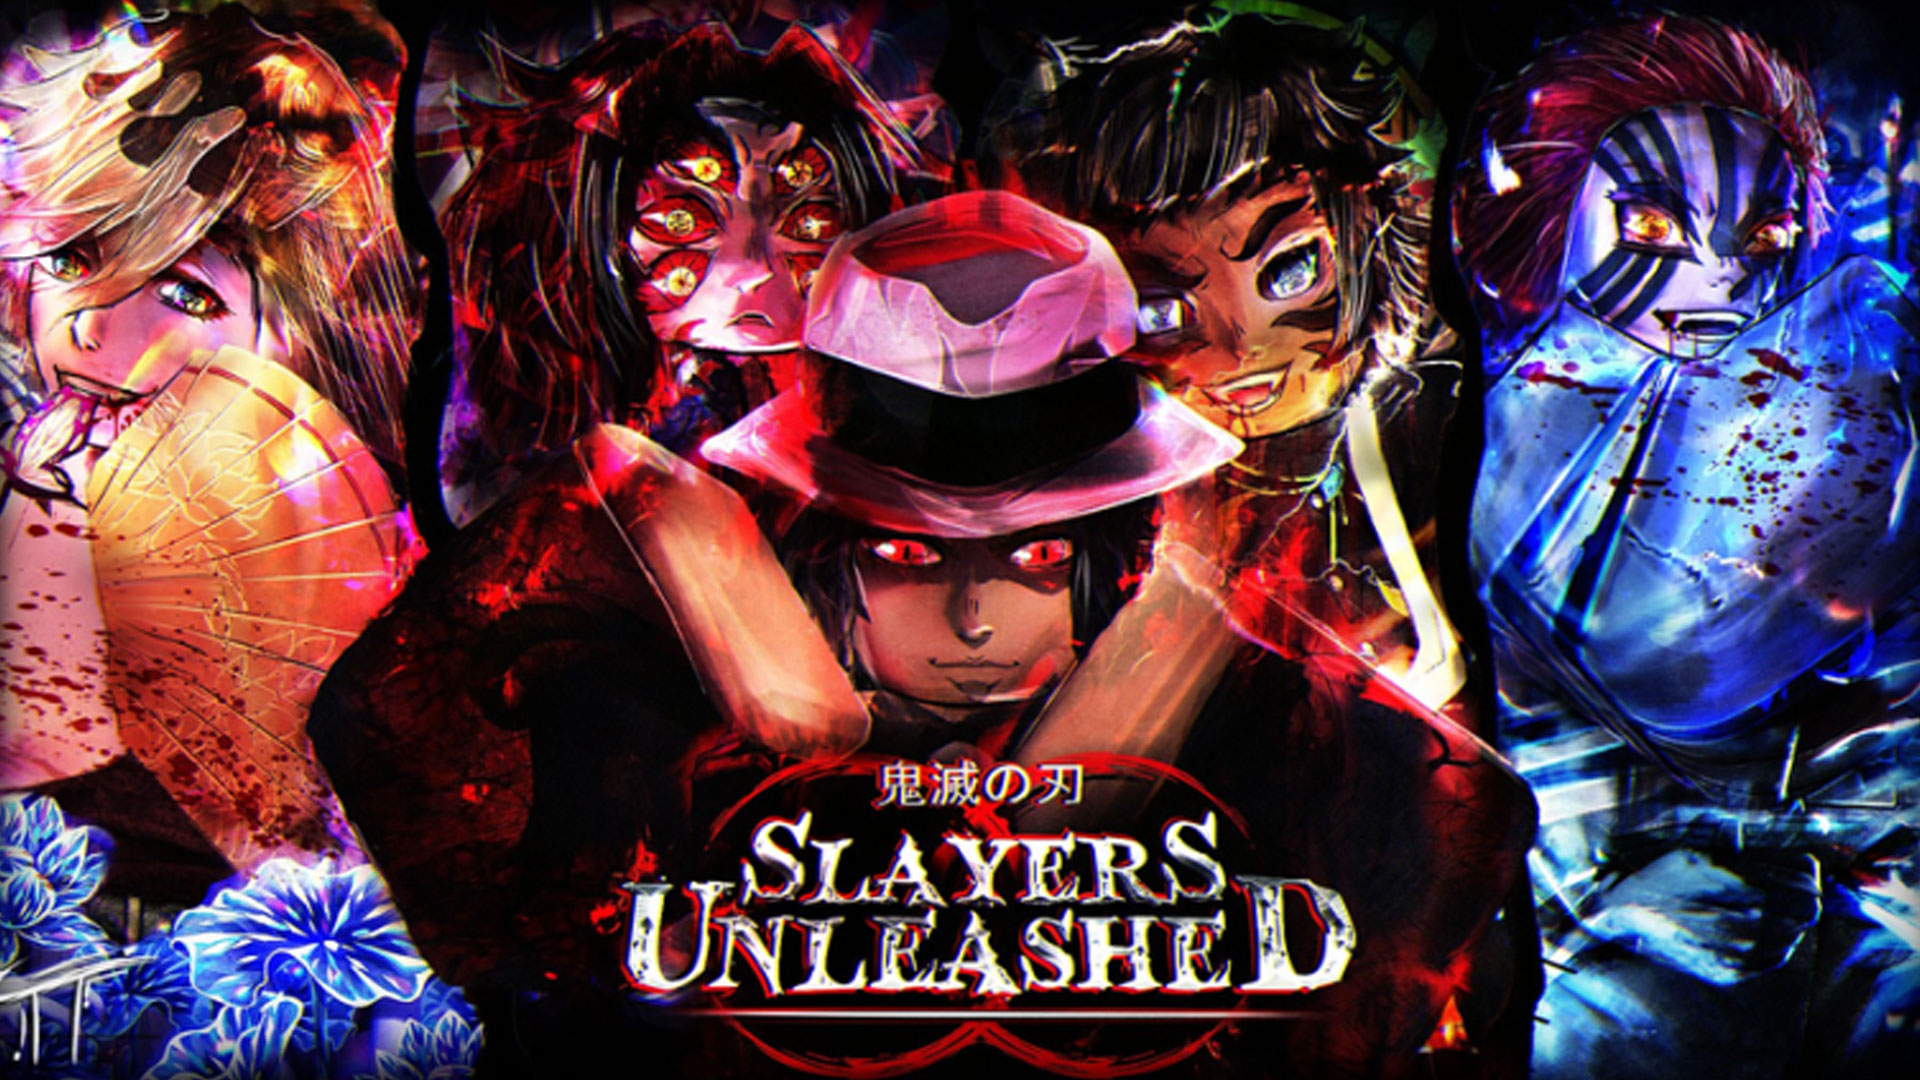 Insect Breathing, Slayers Unleashed Wiki